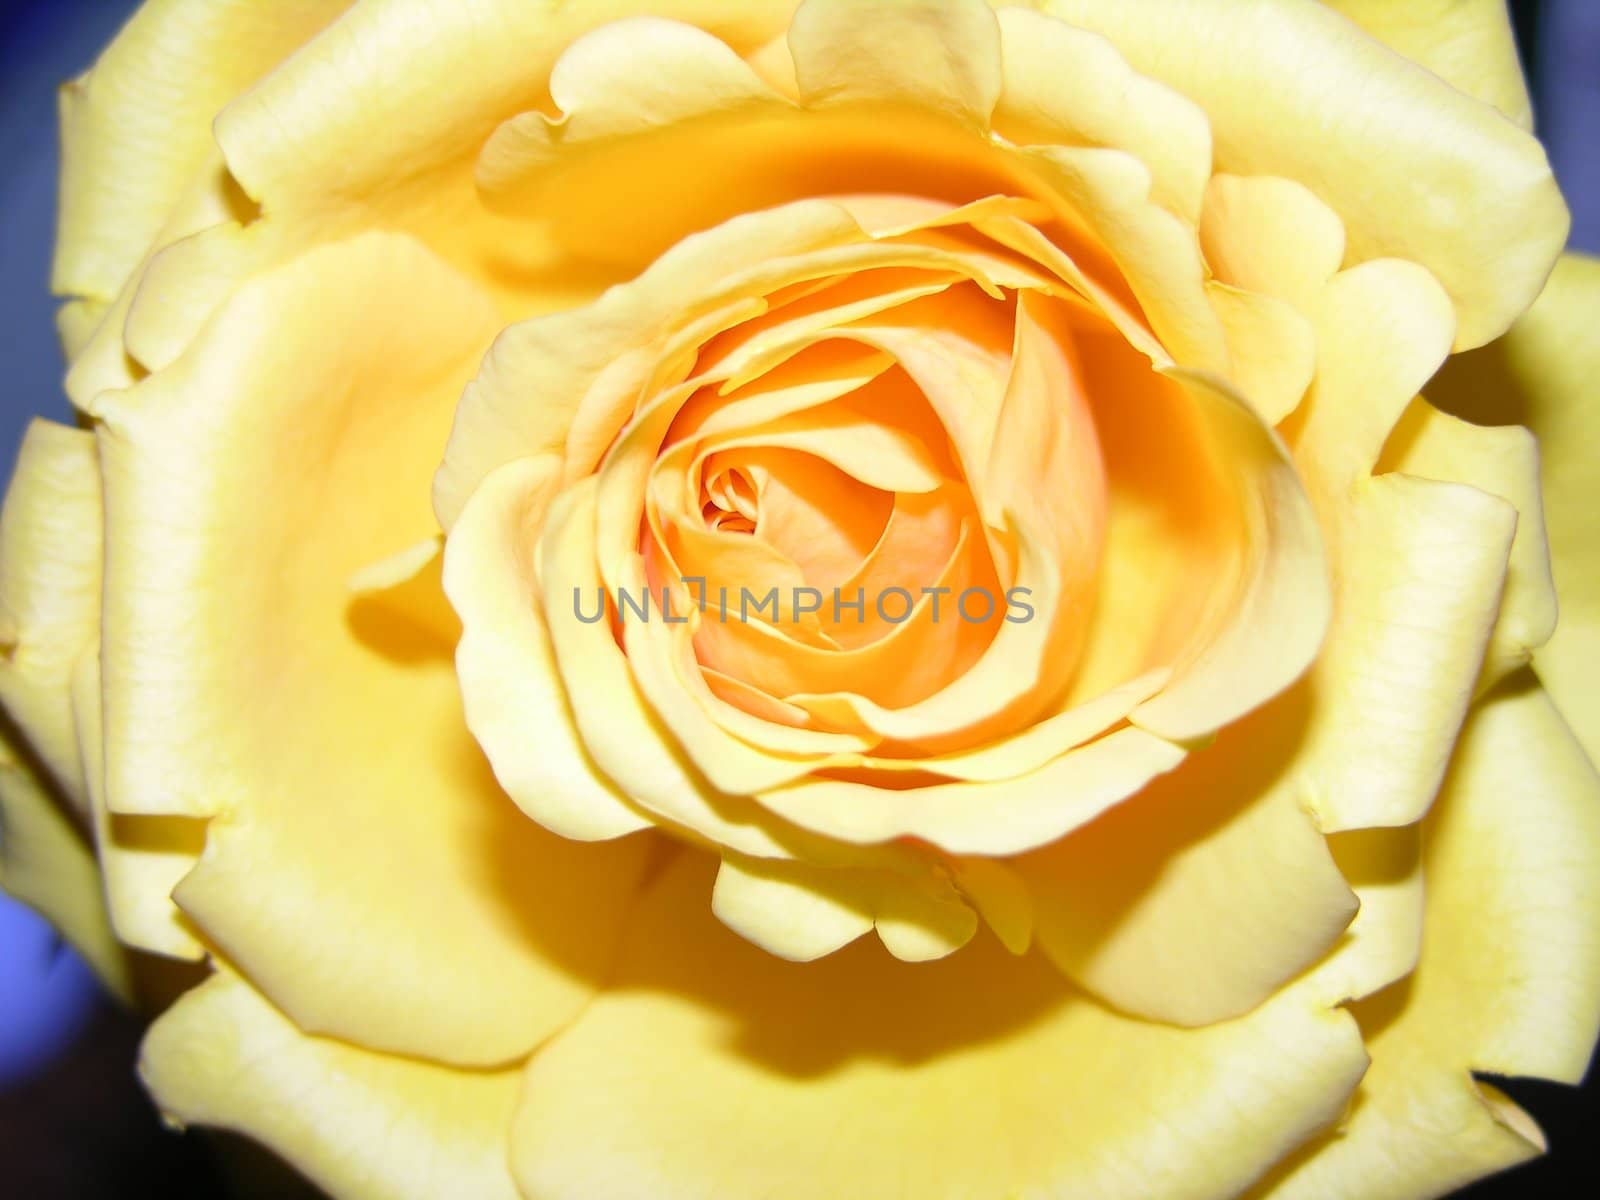 A large yellow rose seen up close